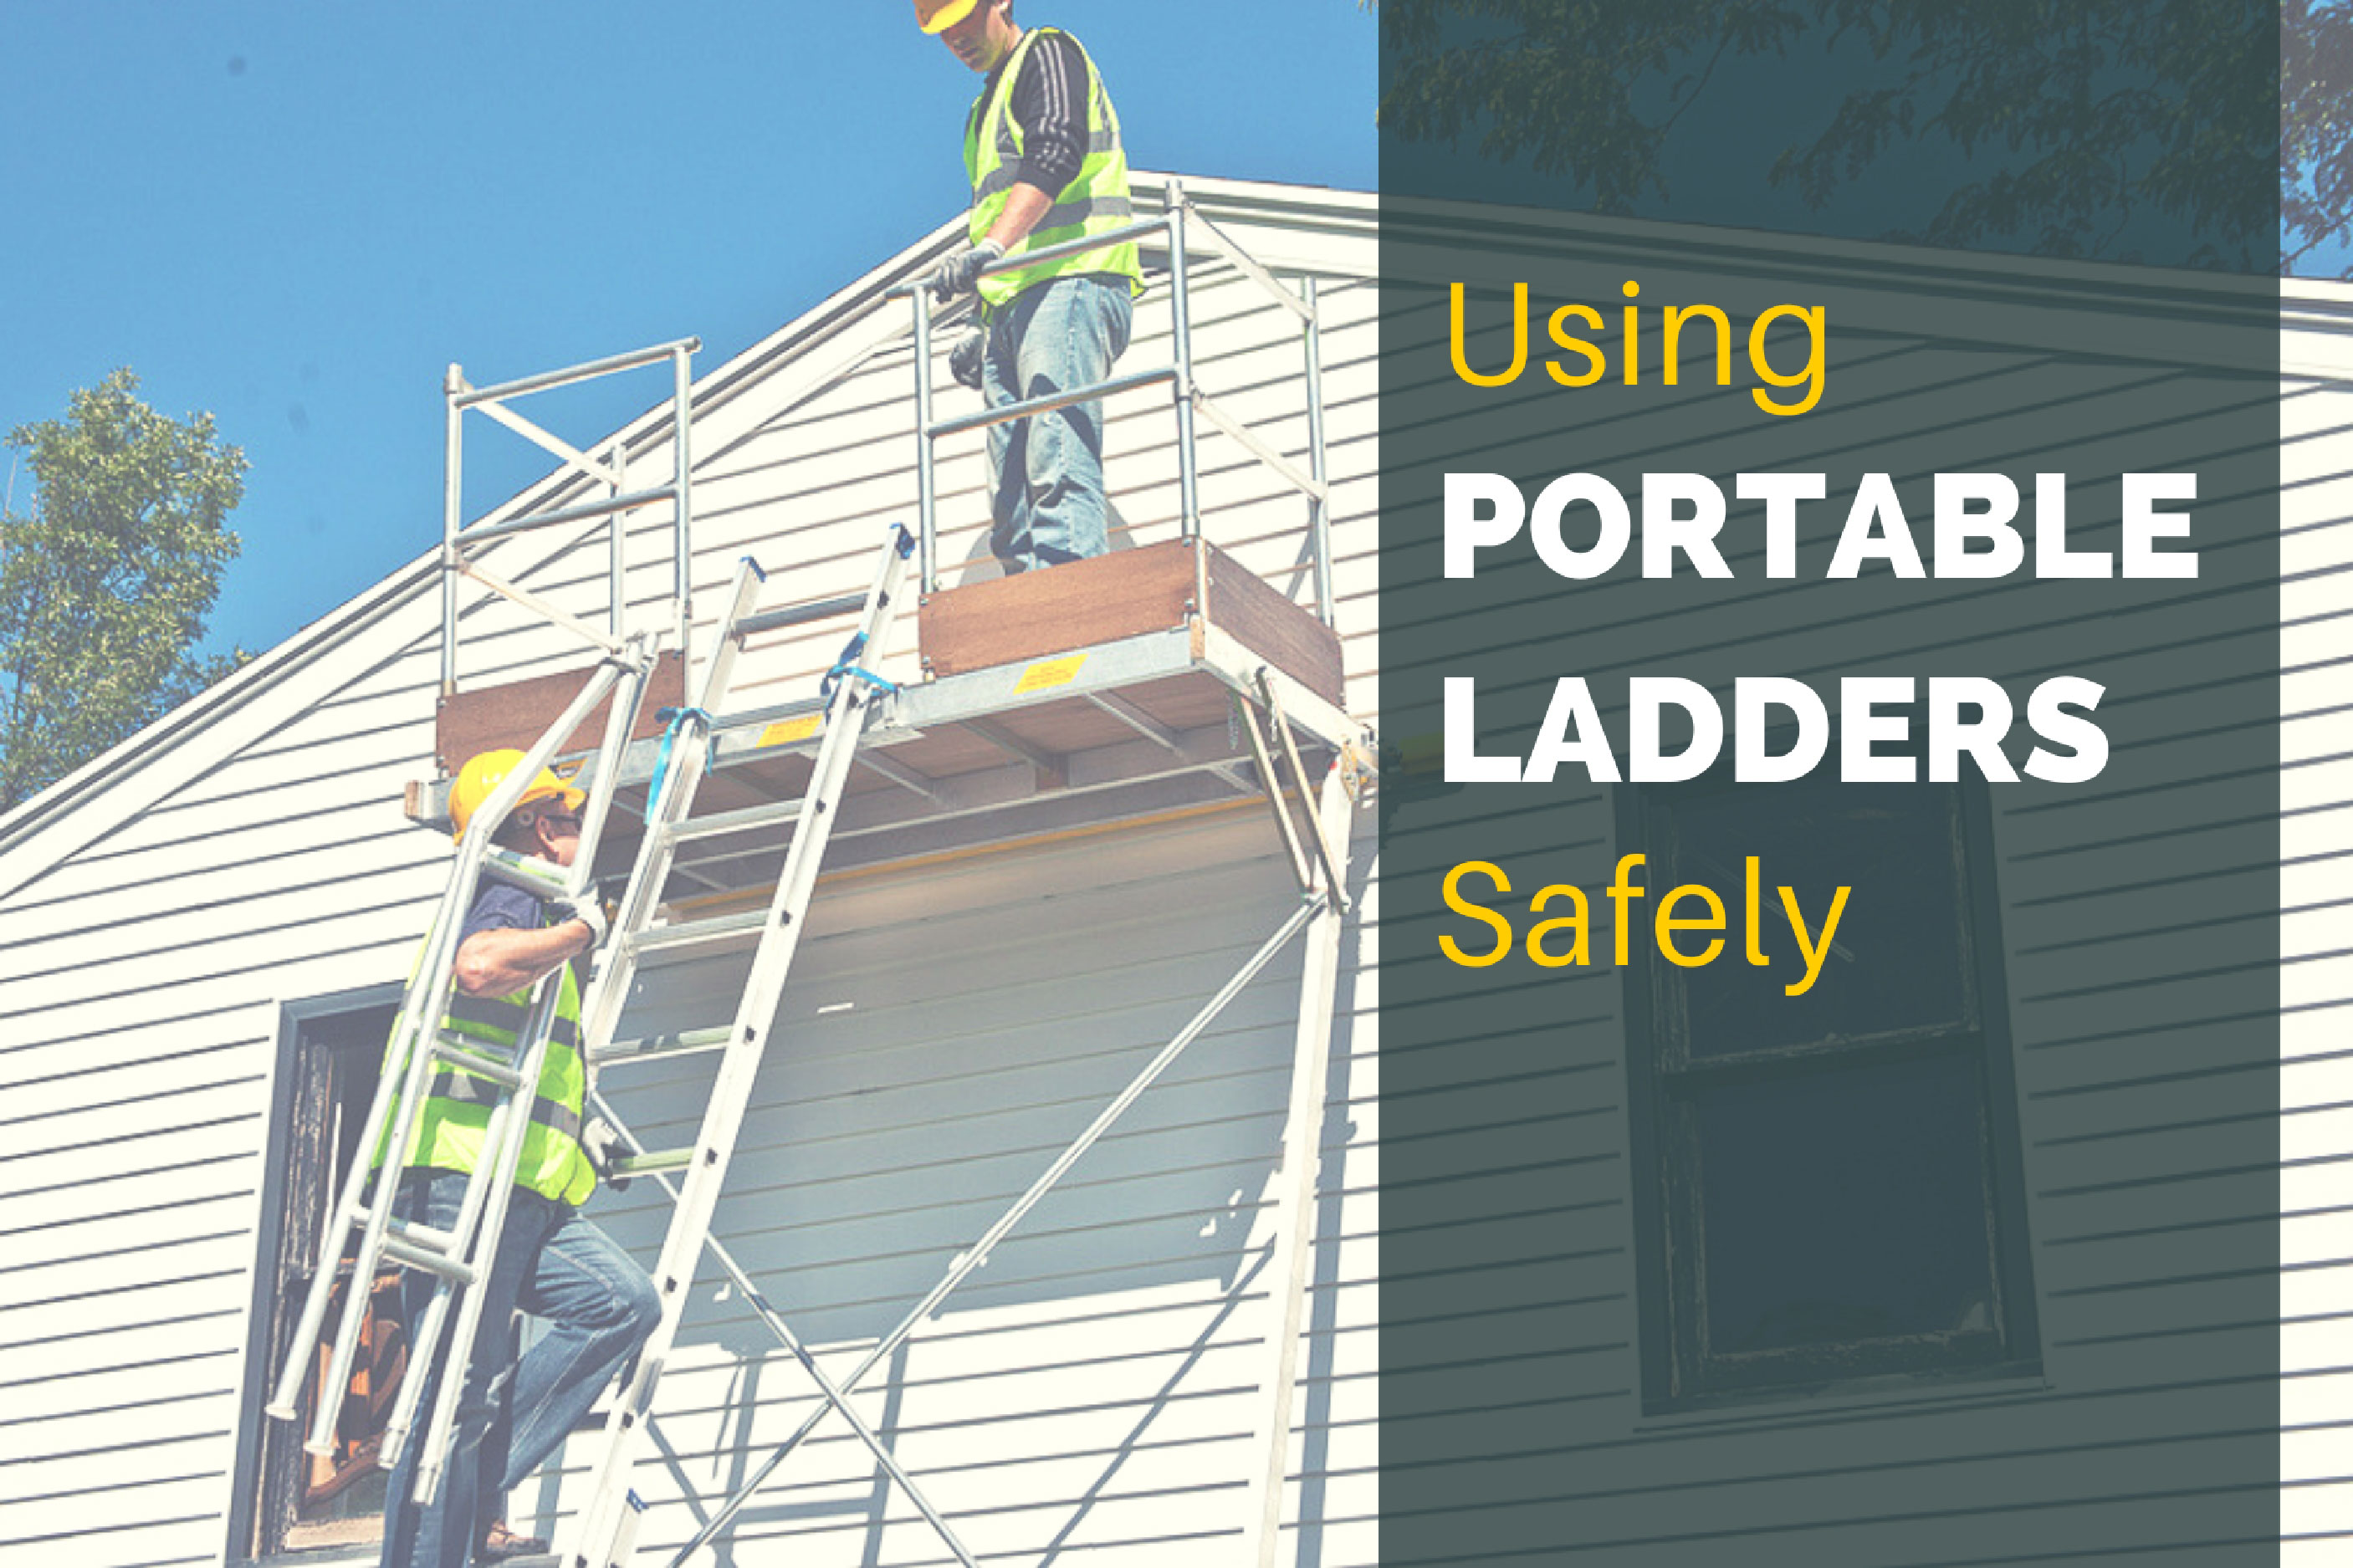 Using Portable Ladders Safely